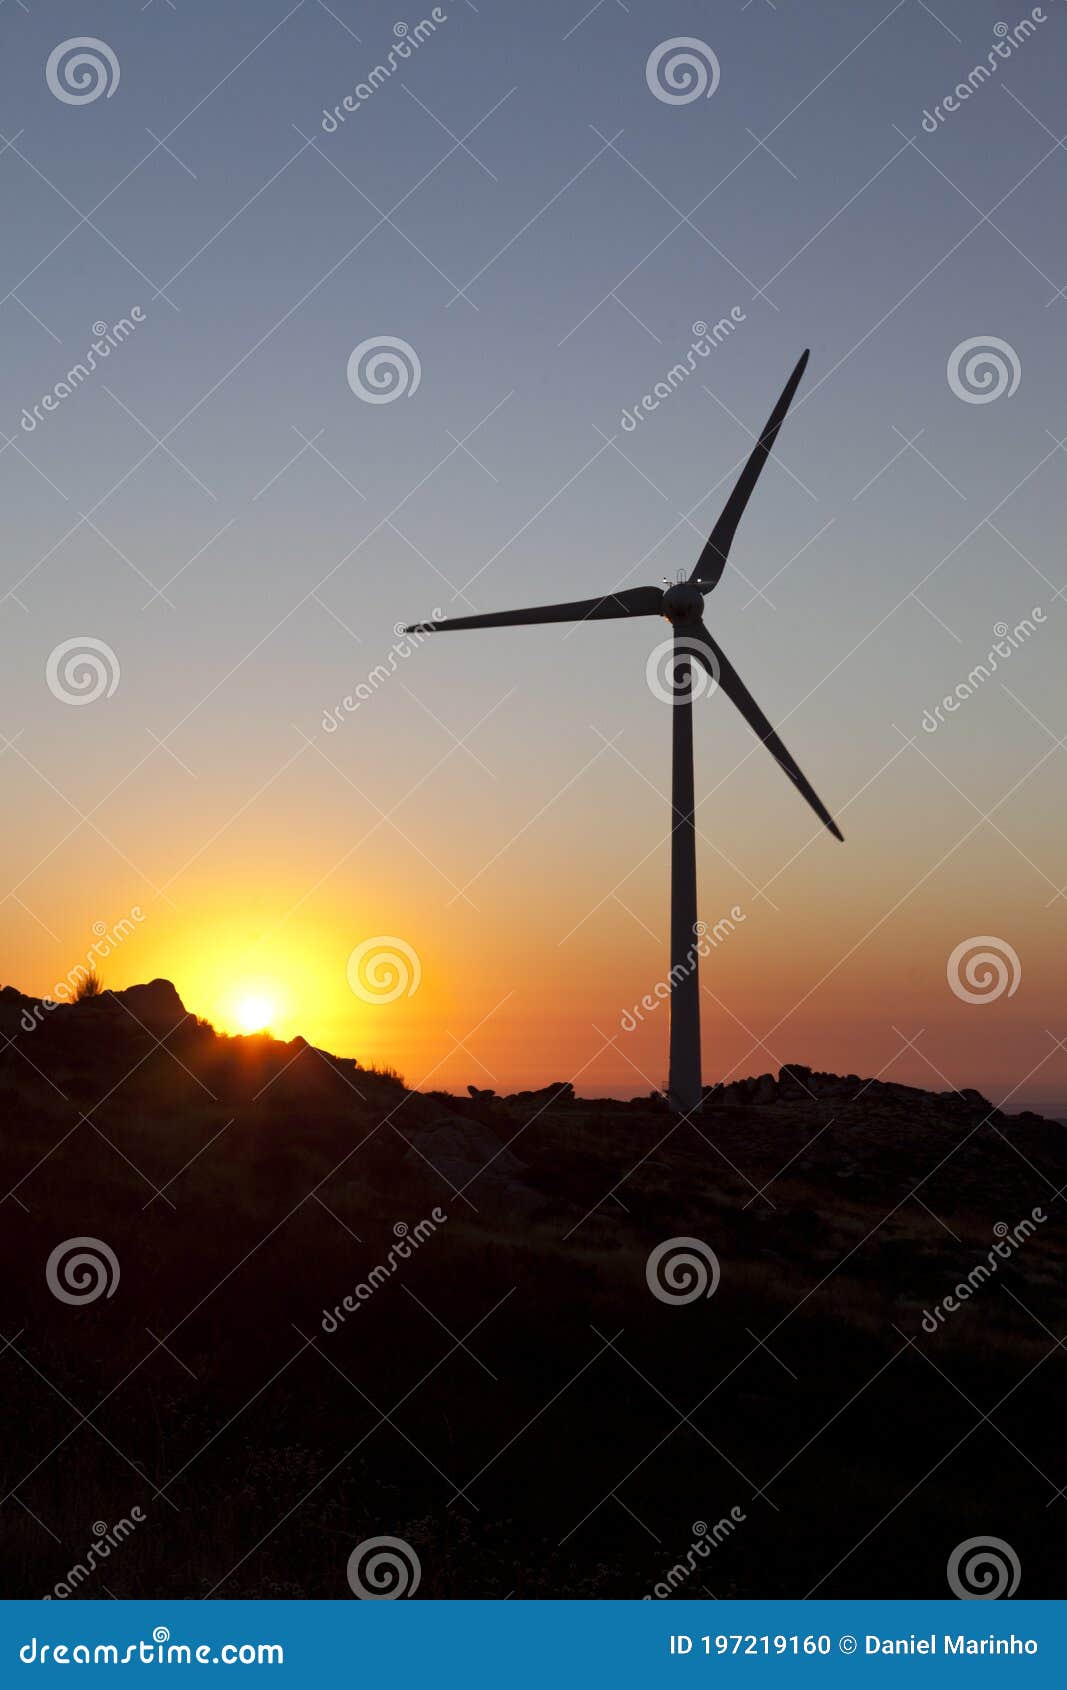 high constrast sillouette of a wind turbine